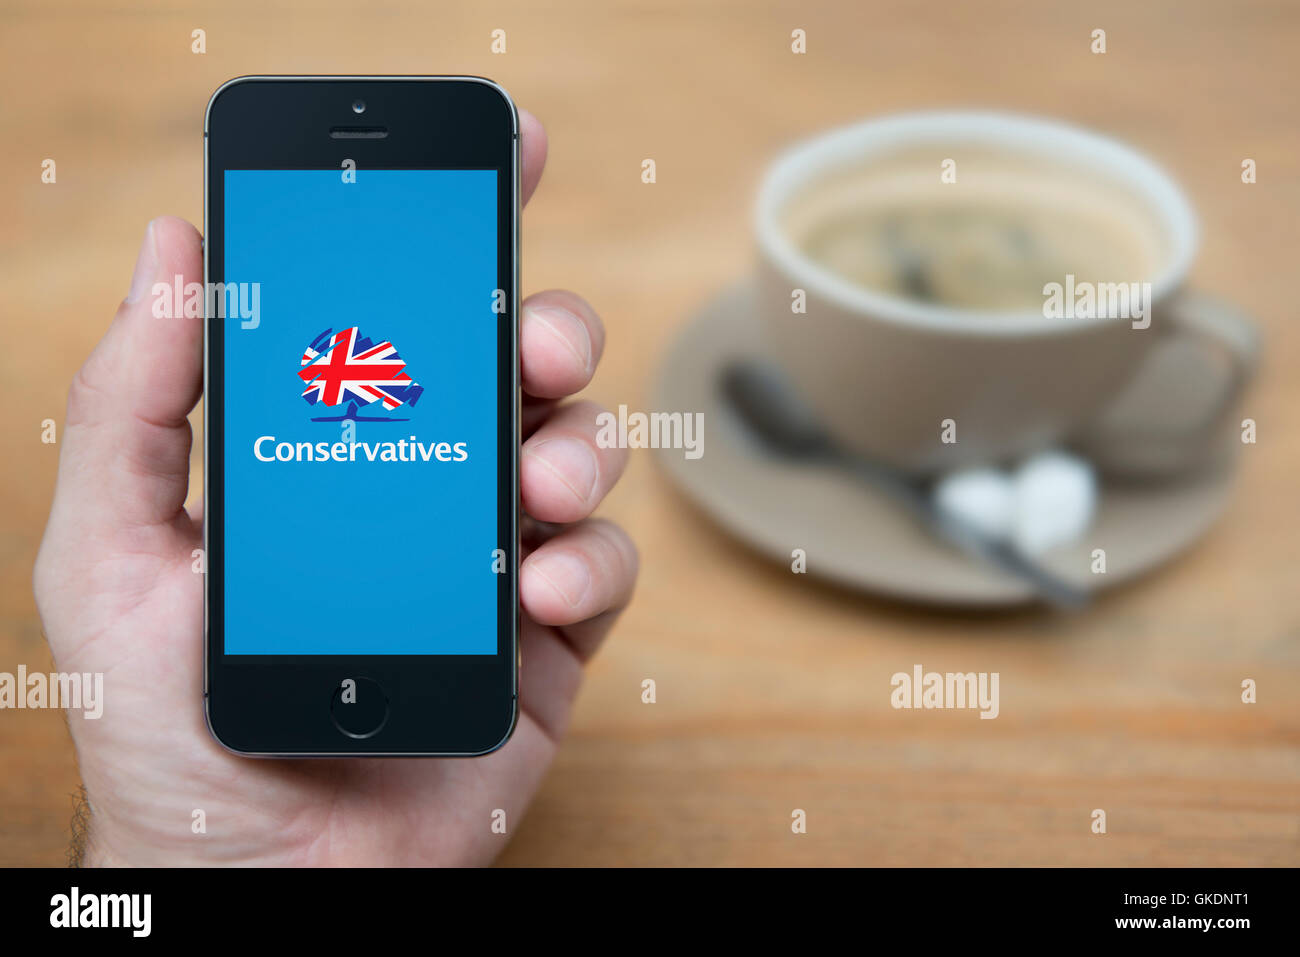 A man looks at his iPhone which displays the Conservatives logo, while sat with a cup of coffee (Editorial use only). Stock Photo